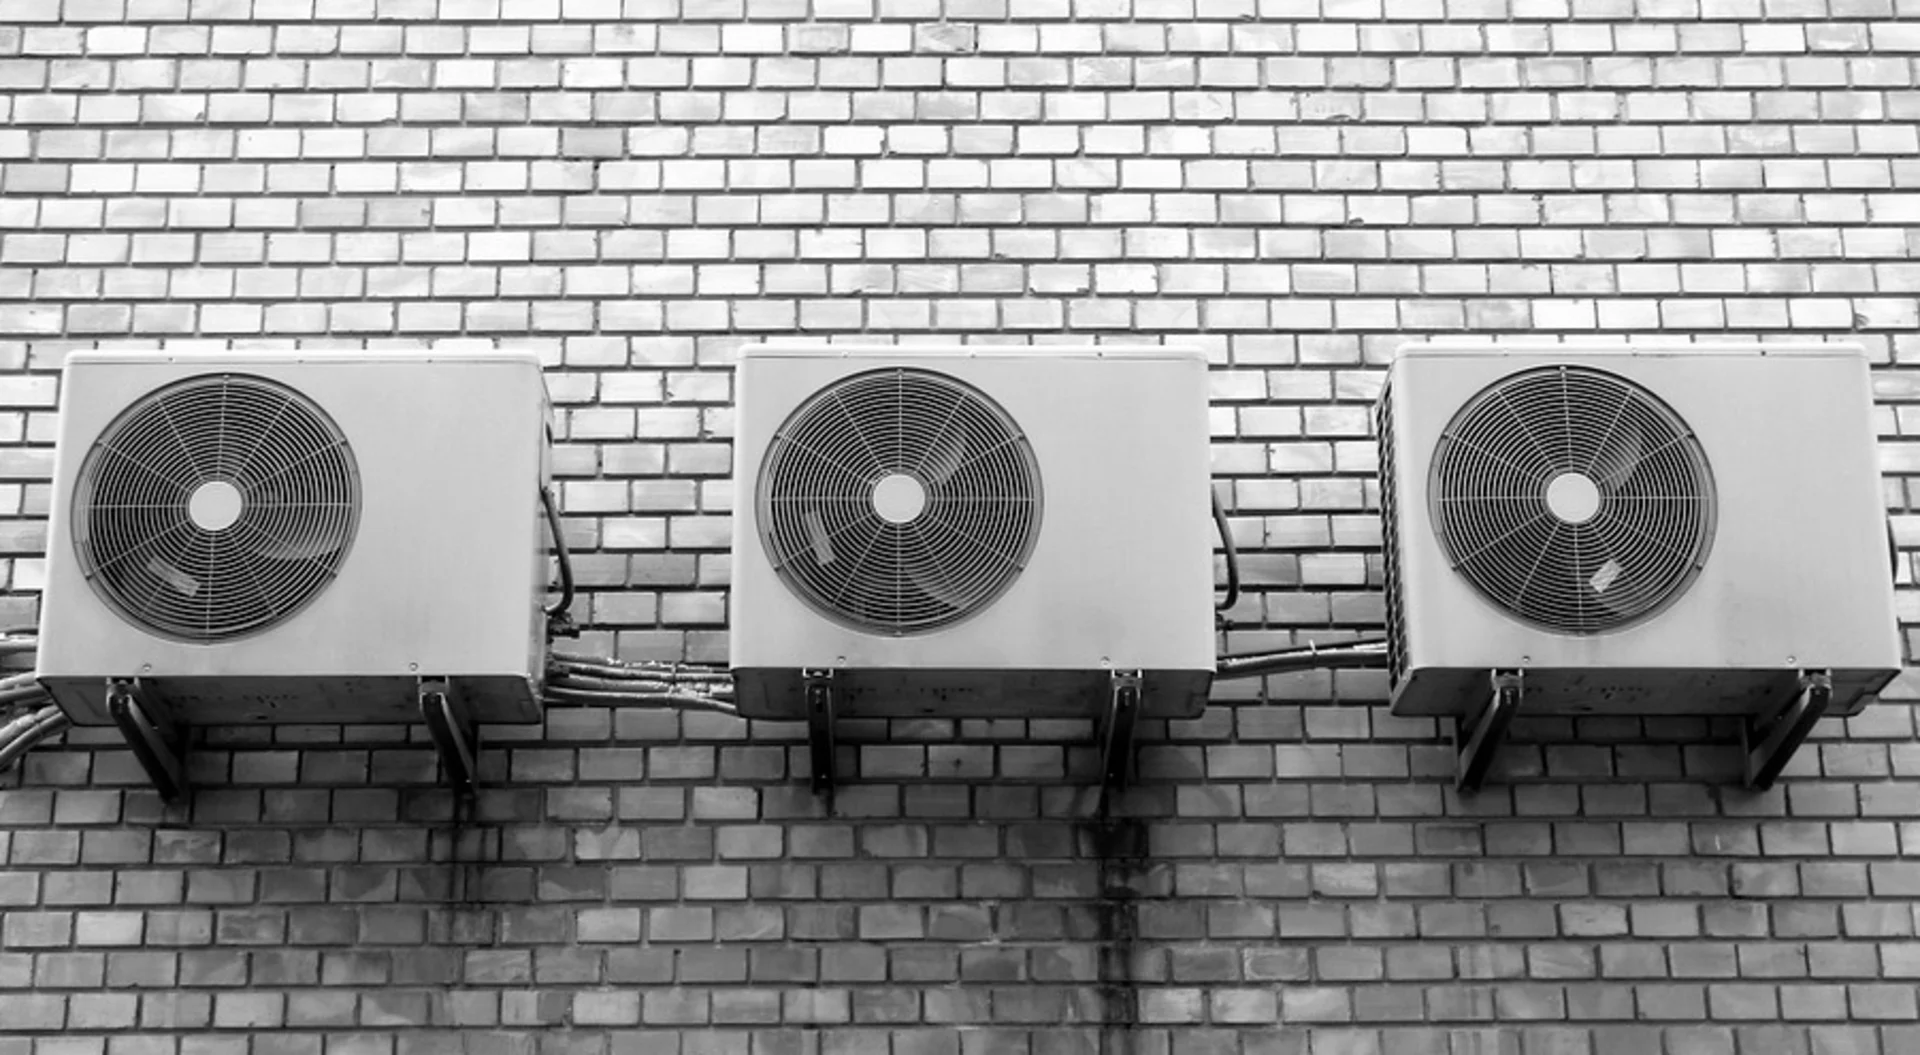 Why air conditioners can be a problematic solution to extreme heat